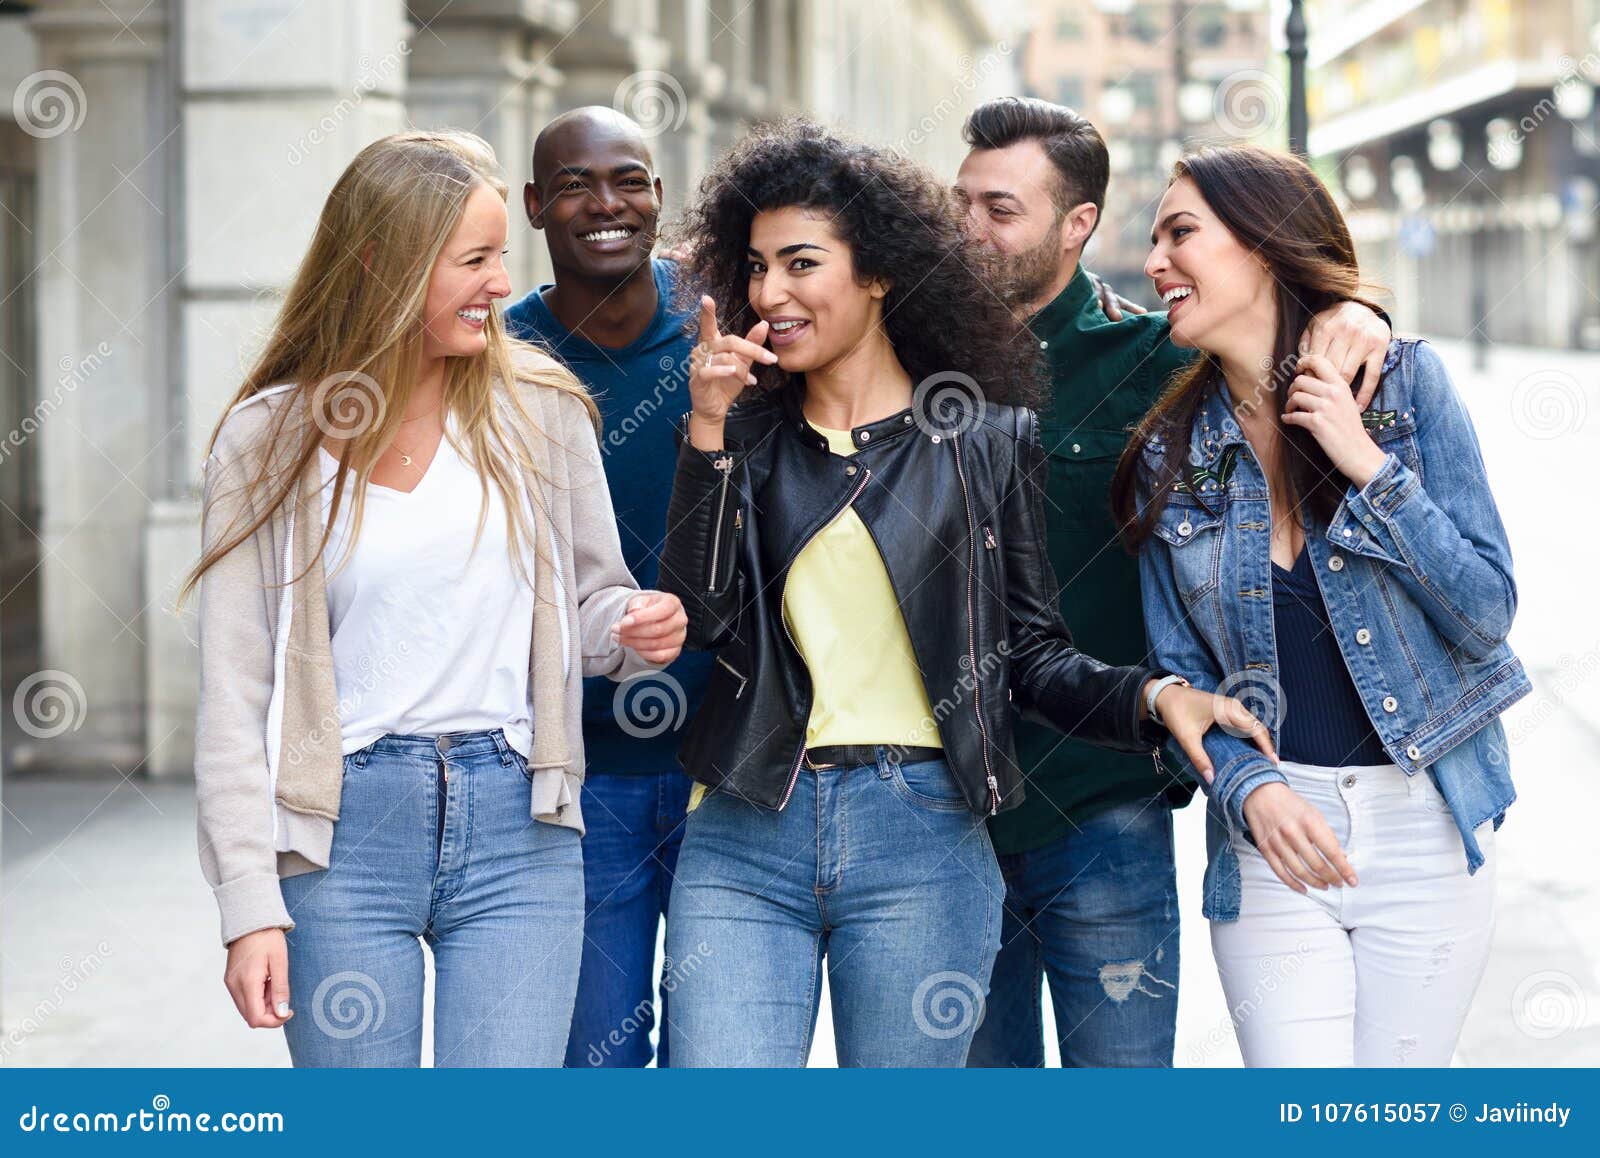 Group Of Friends Having Fun Together Outdoors Stock Image Image Of Multi Outdoors 107615057